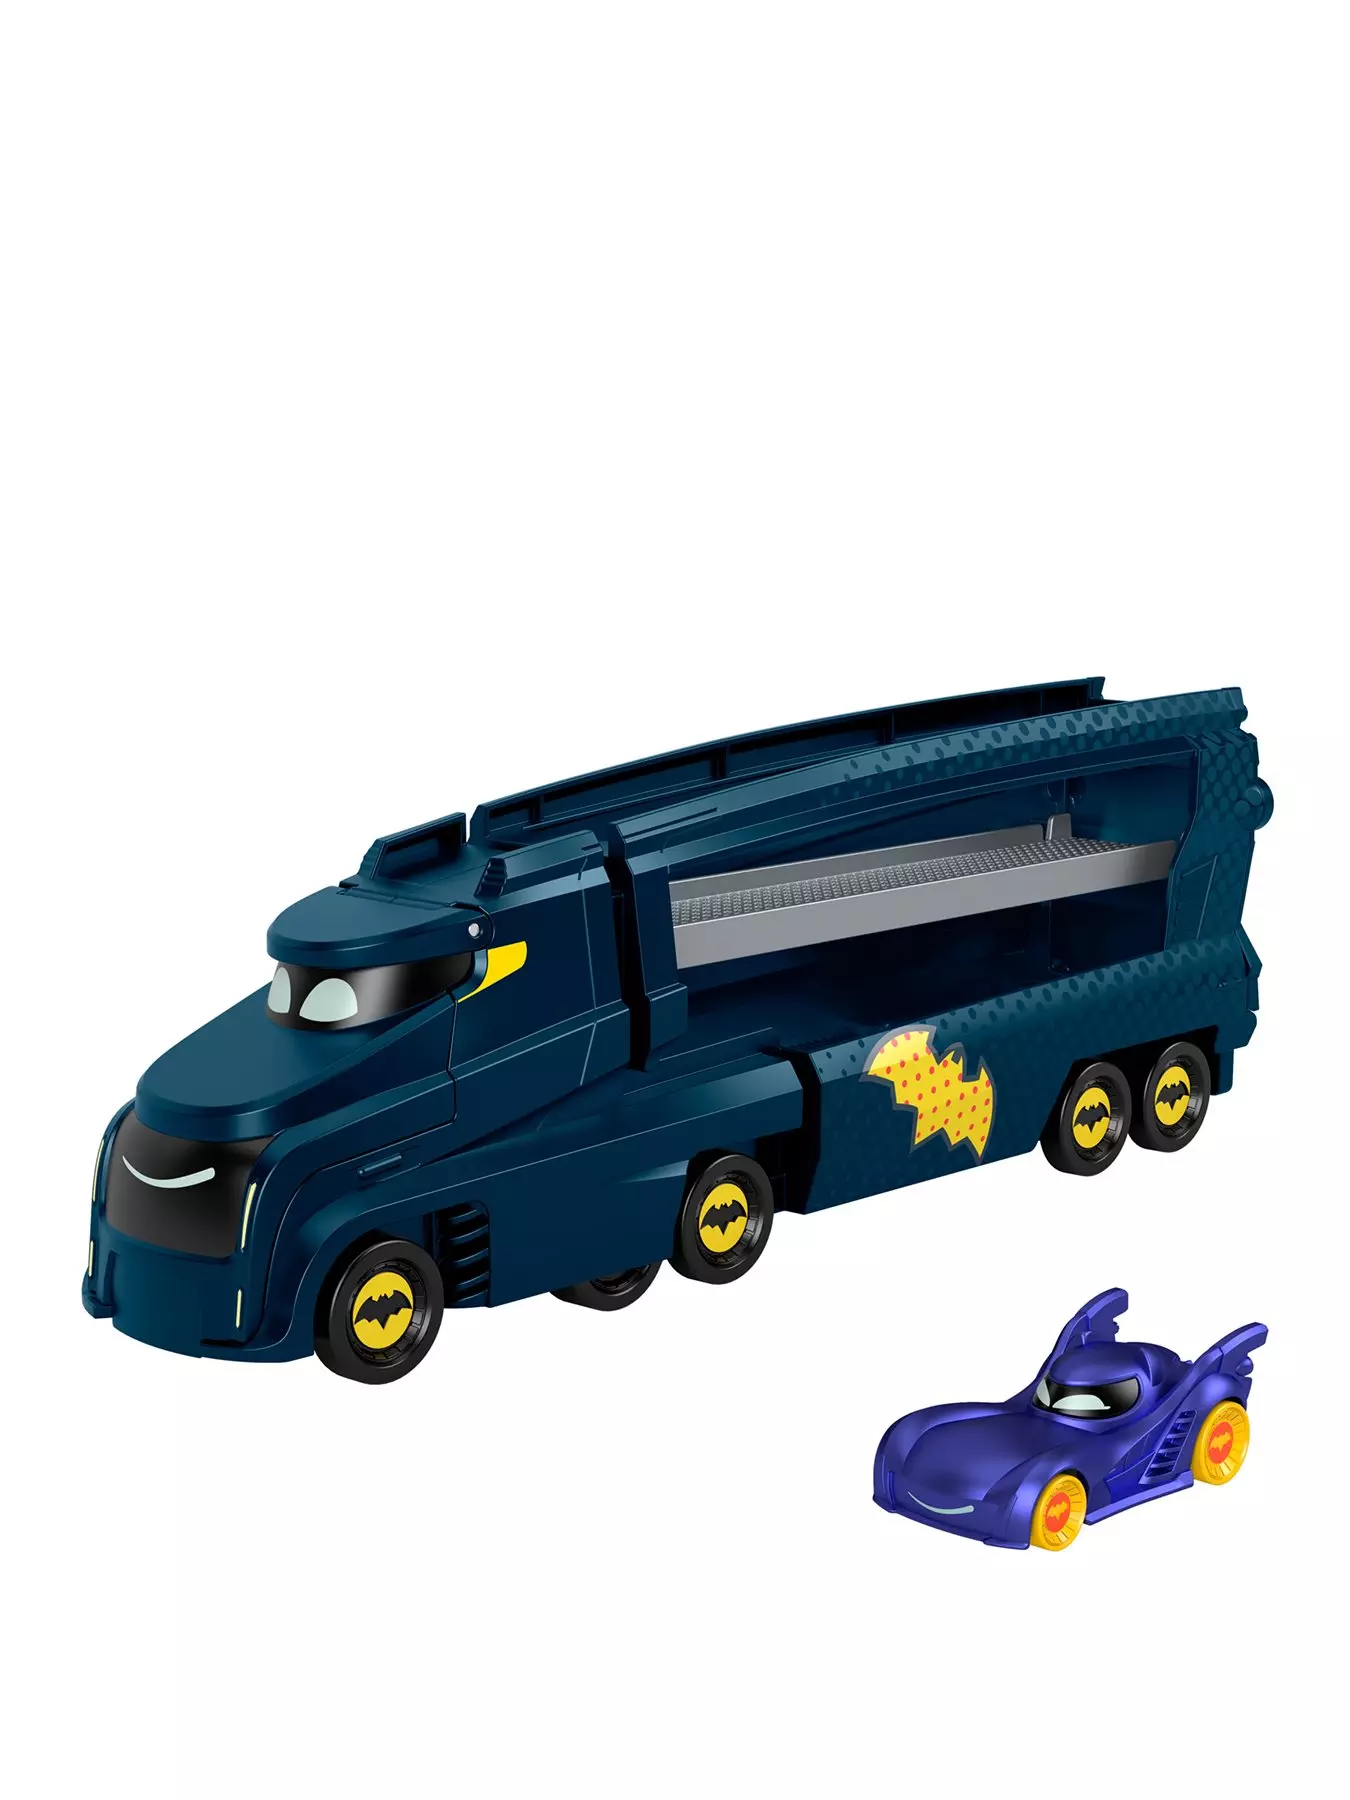 BATWHEELS BAM 3D VEHICLE DELUXE LIGHT-UP - The Toy Book